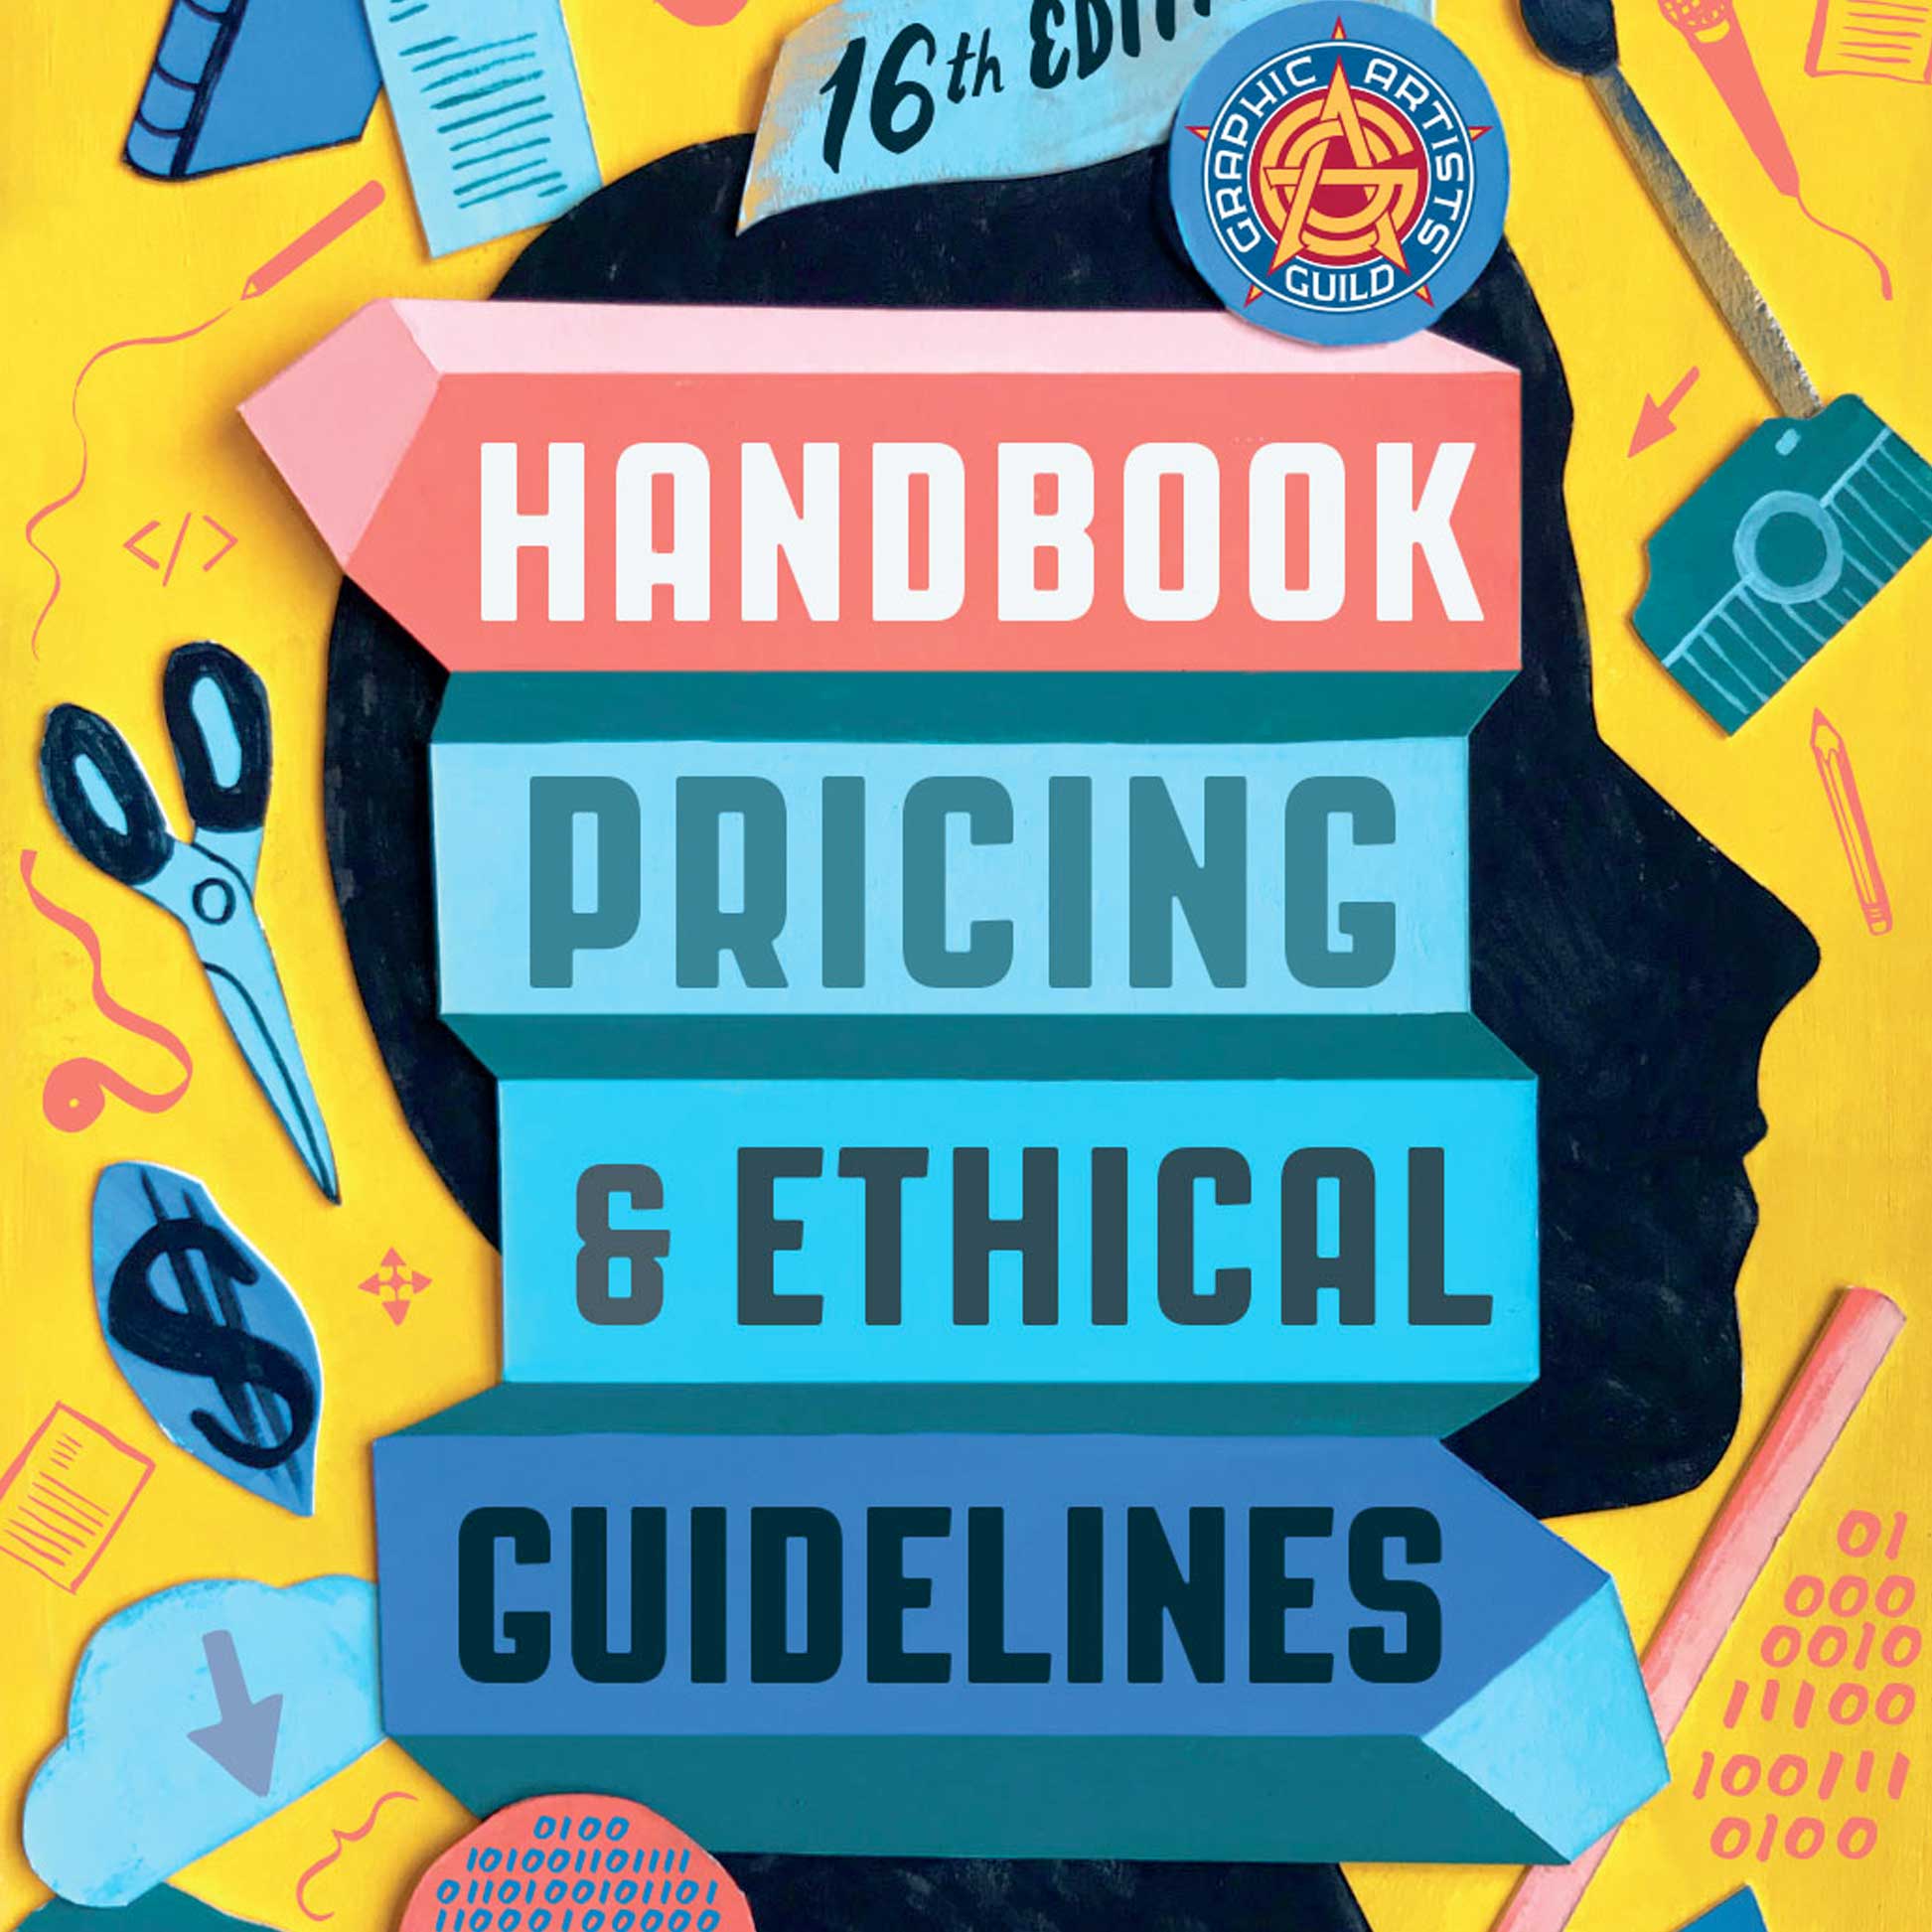 detail of the Handbook: Pricing & Ethical Guidelines cover